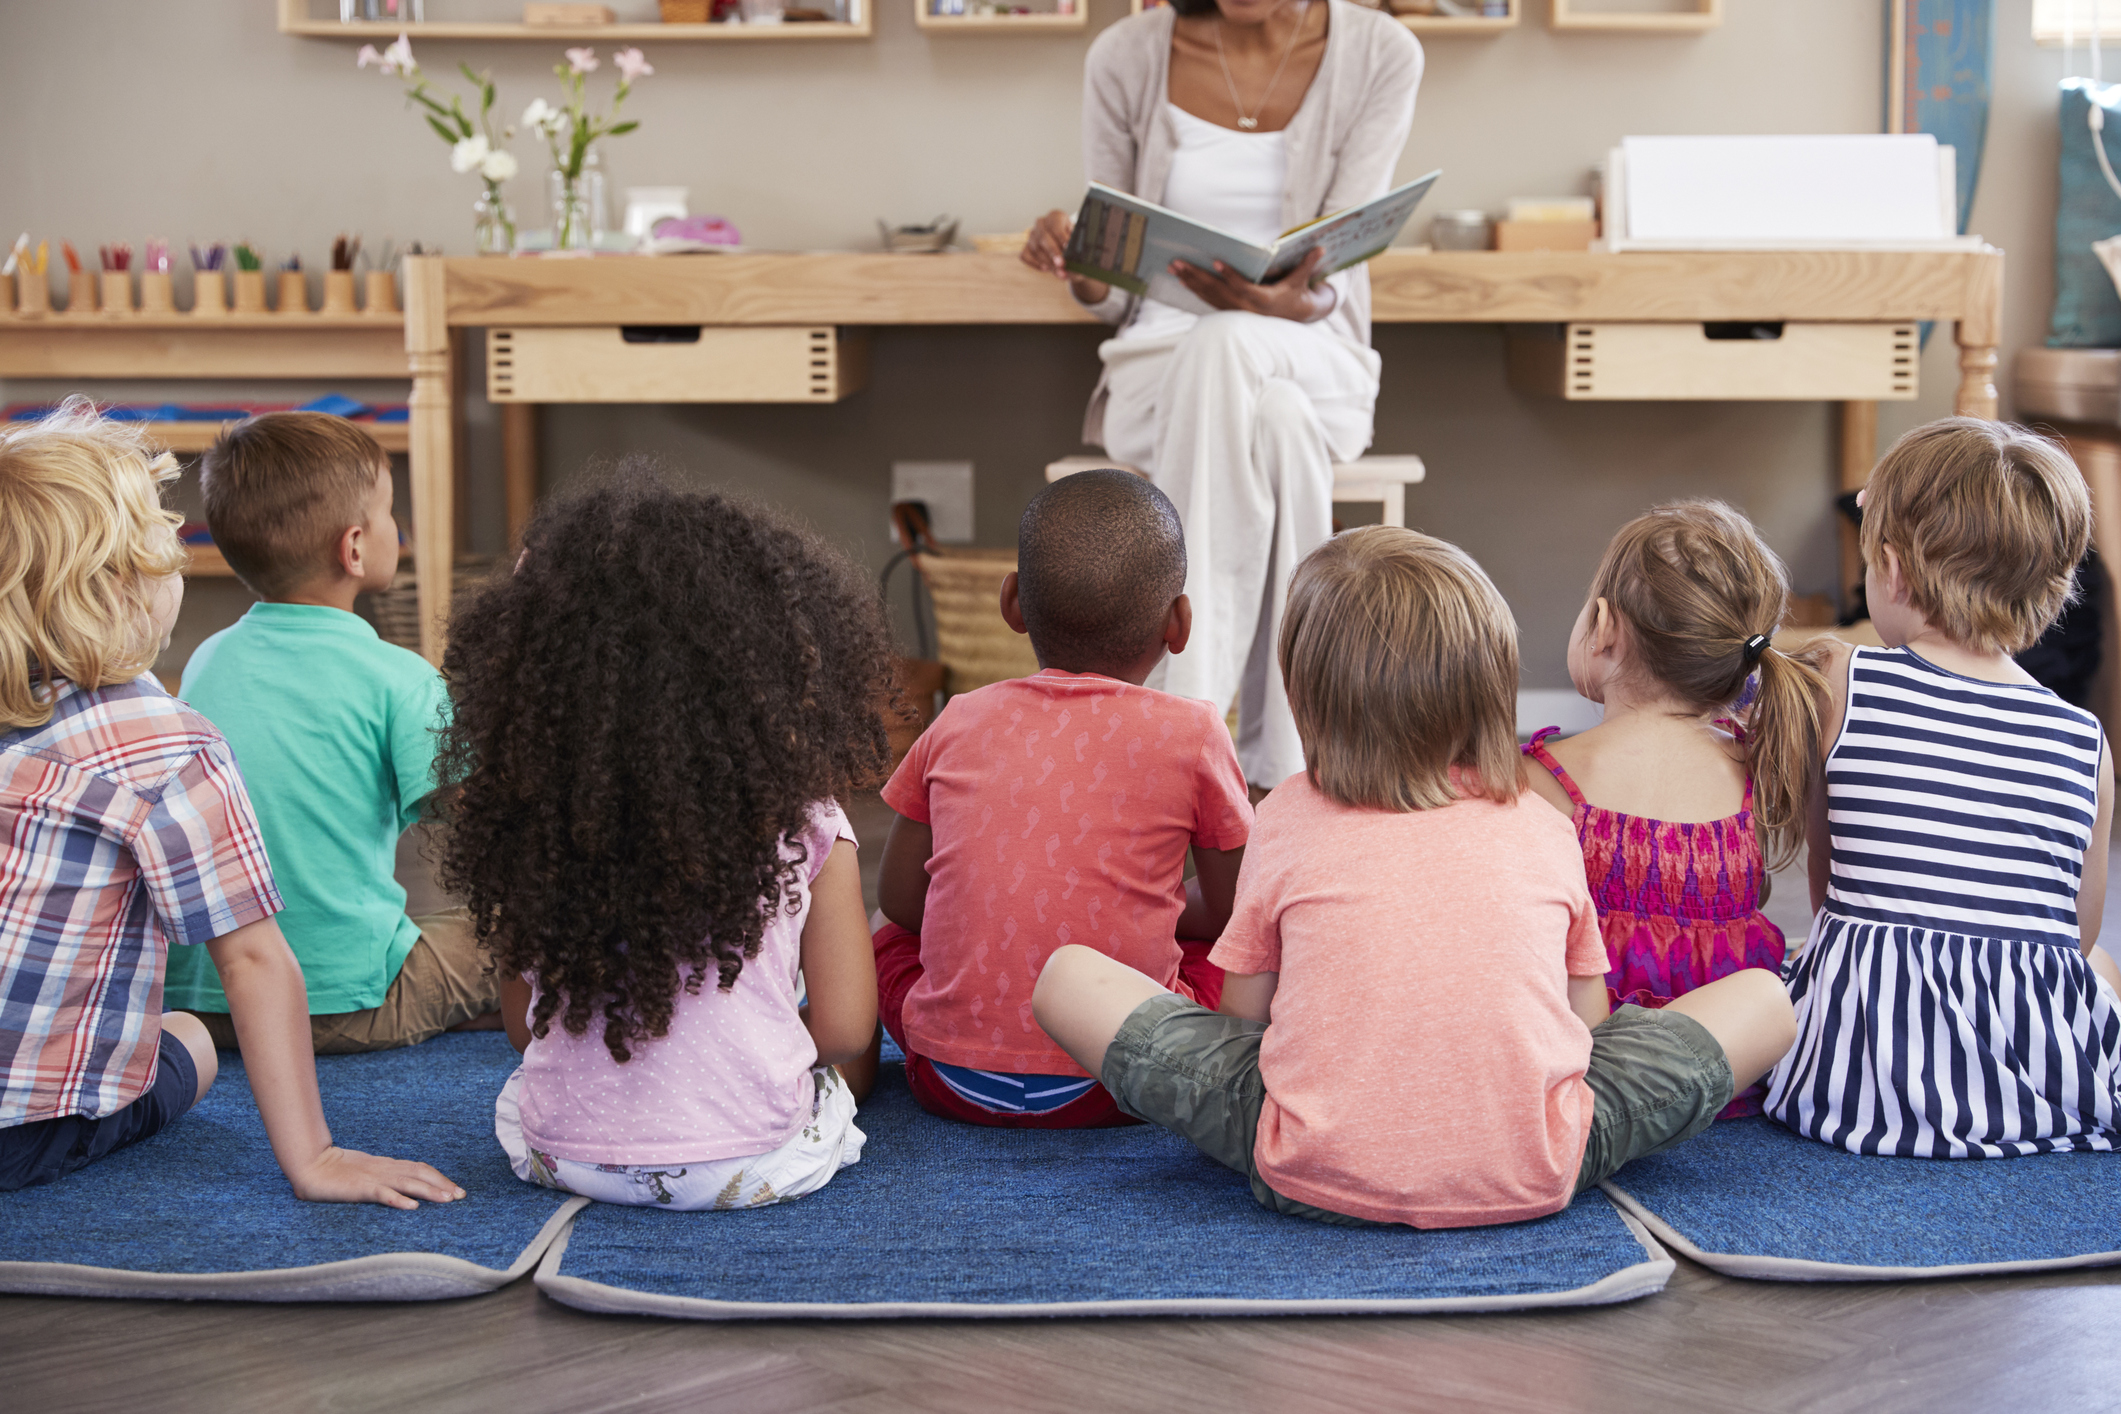 New research examines outcomes for pre-K students.